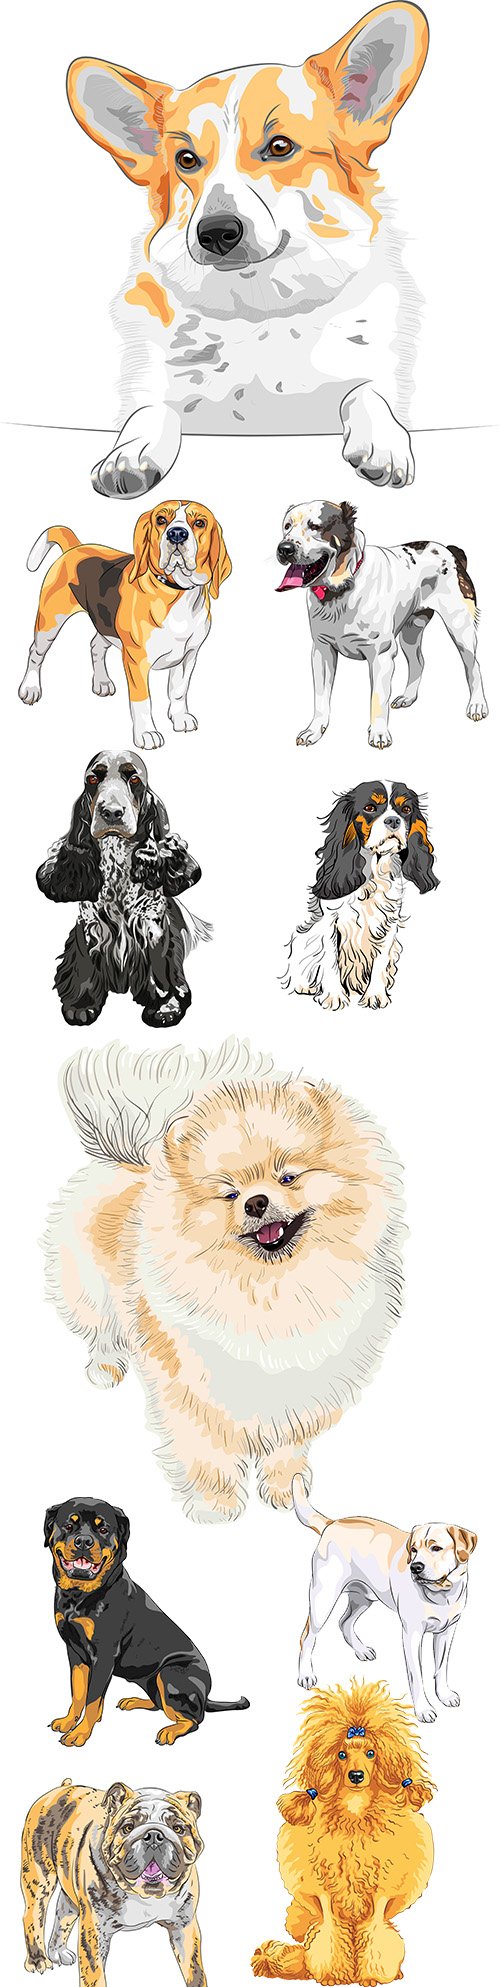 Sketch dog different breed and colour collection illustrations